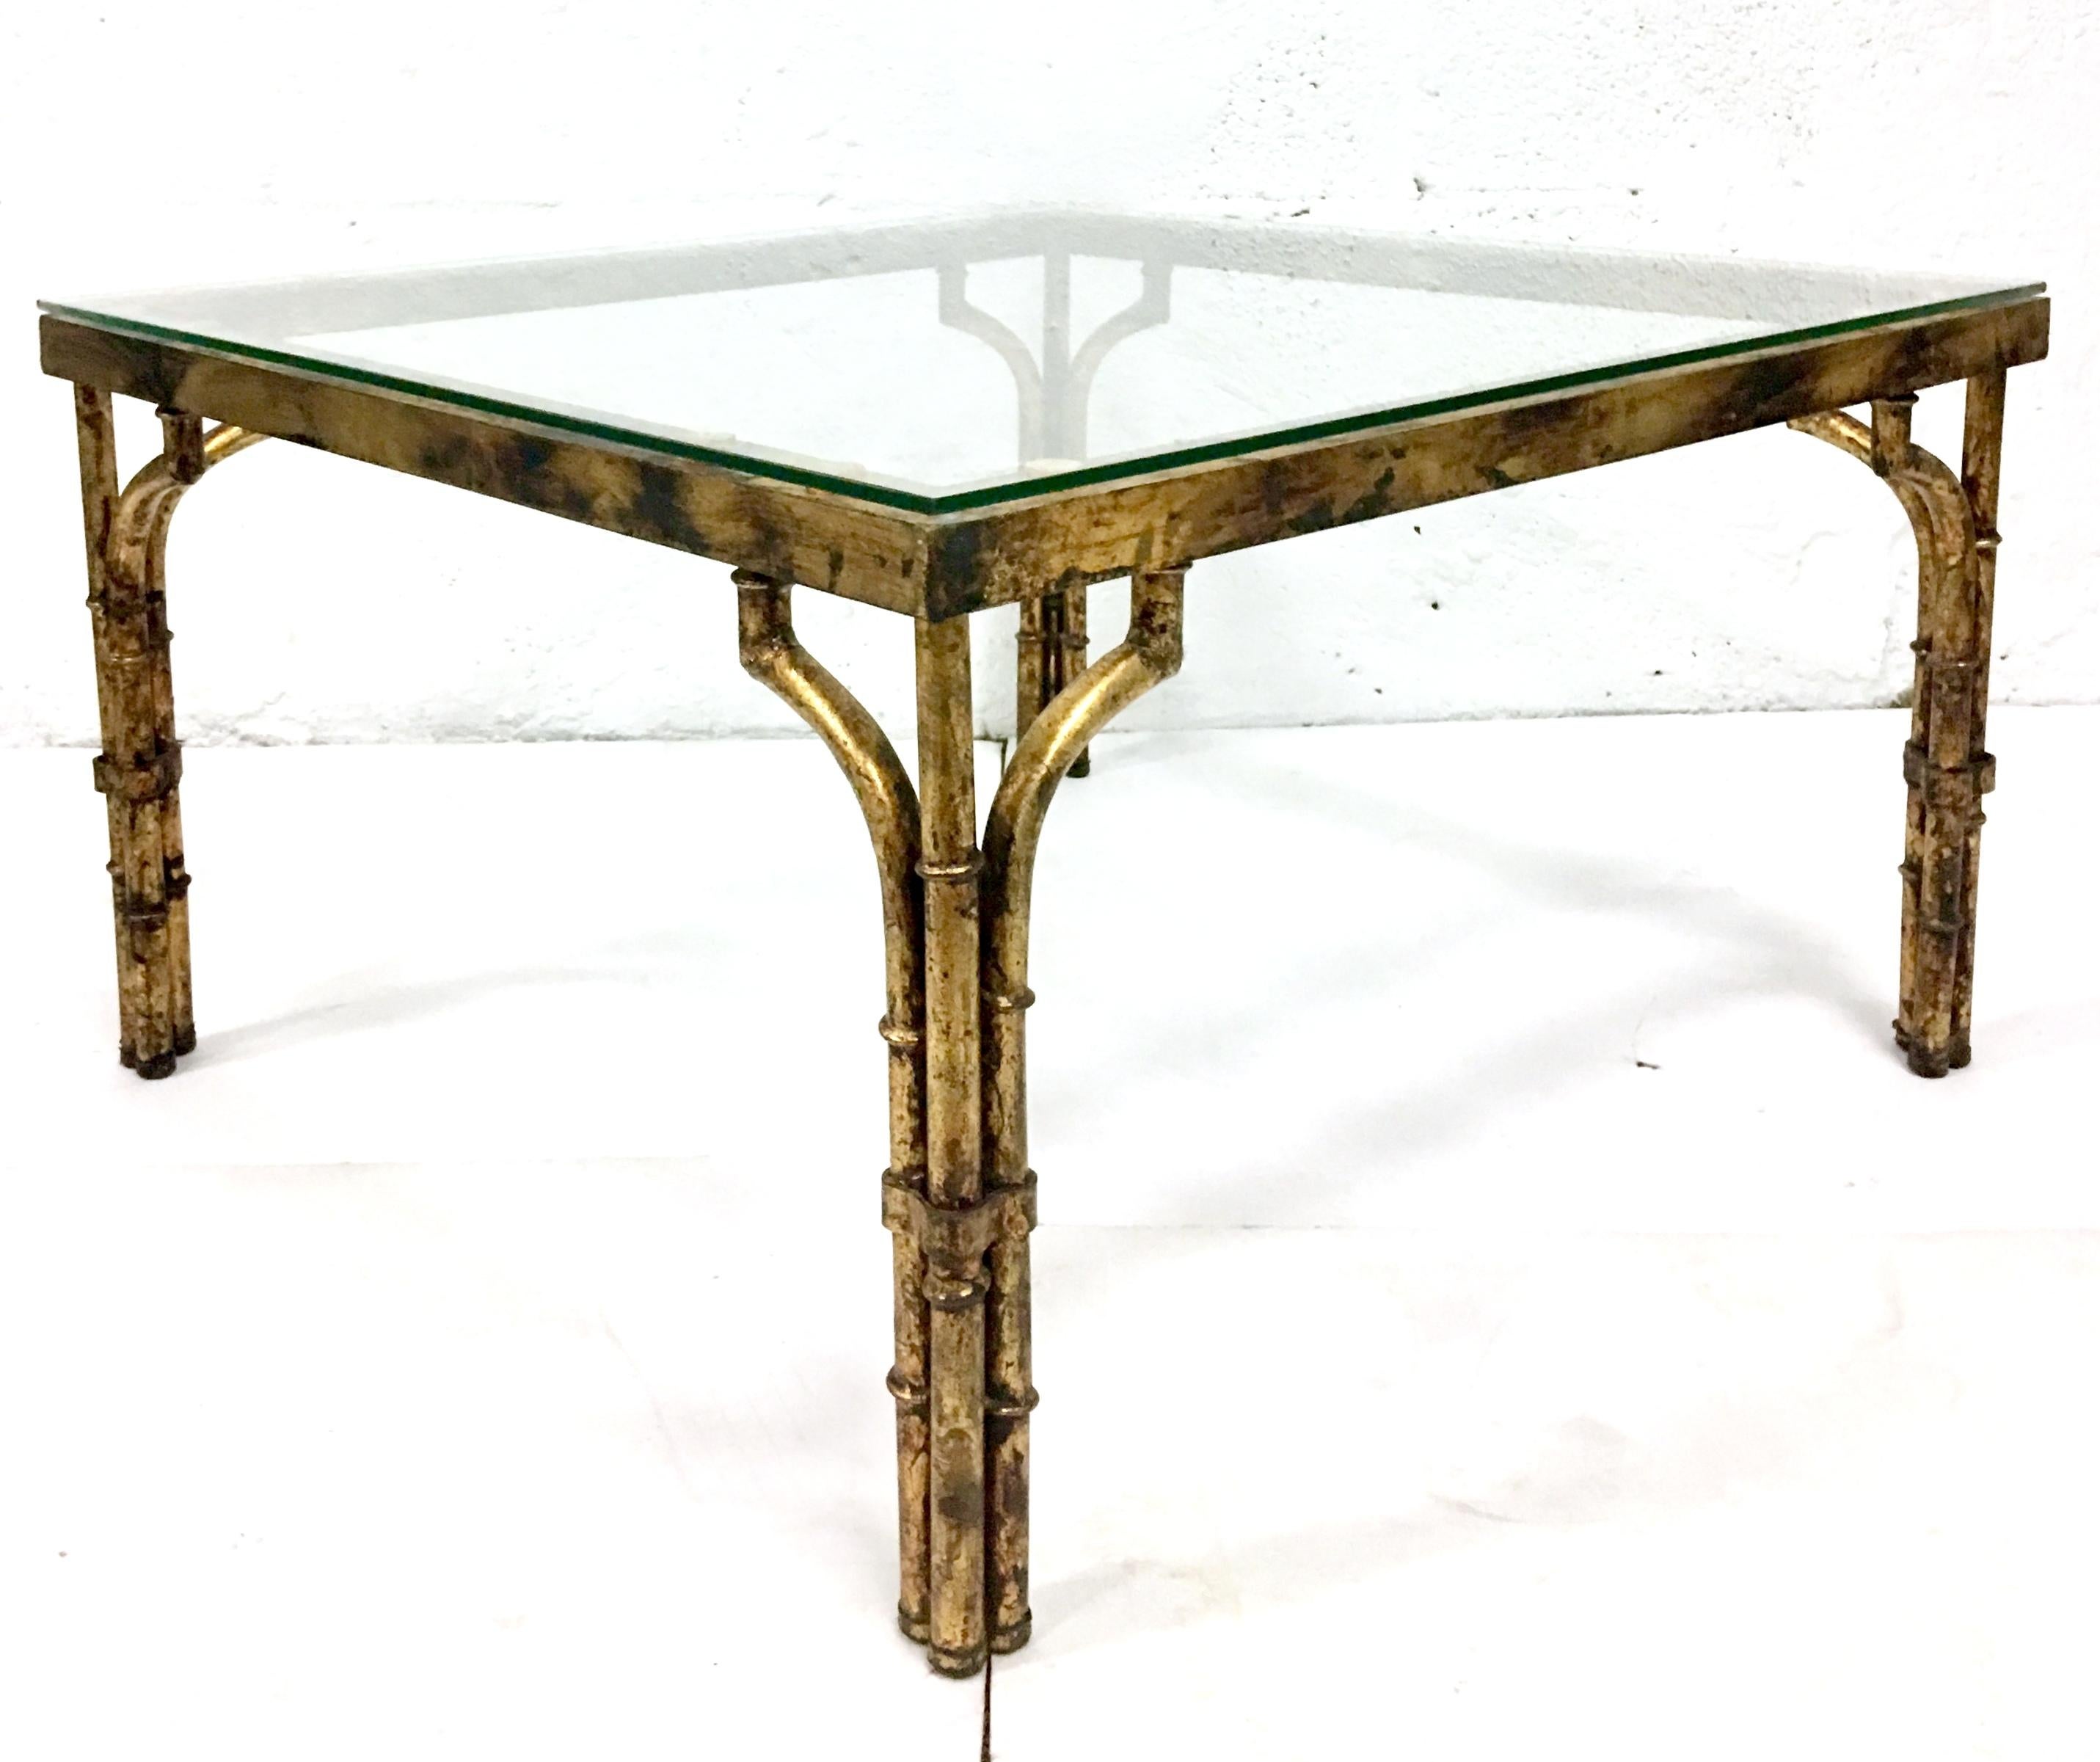 bamboo coffee table with glass top